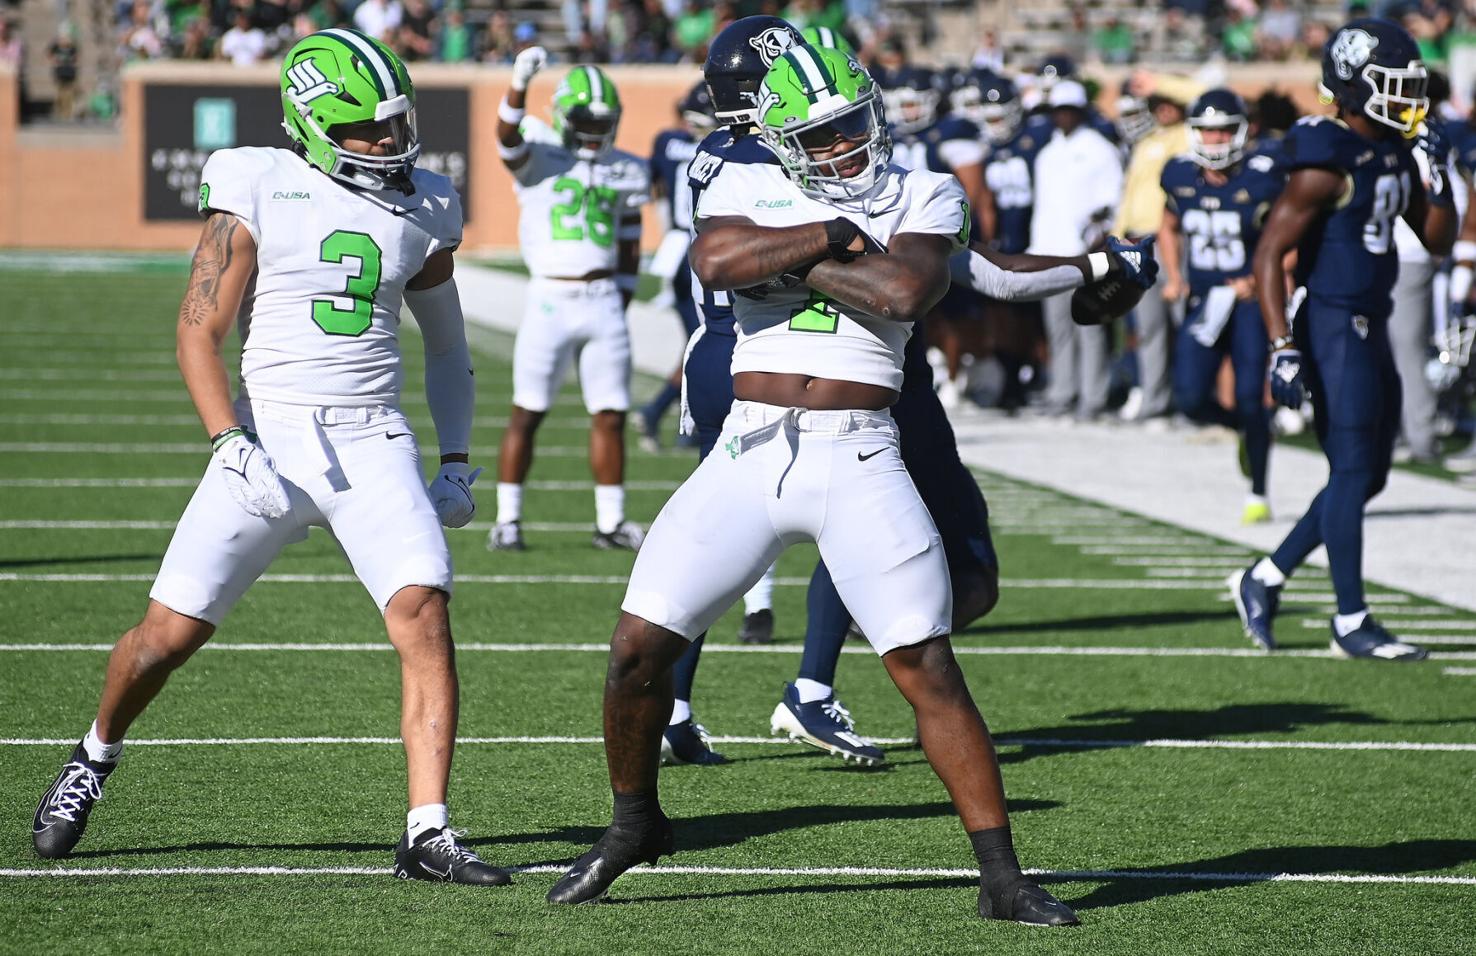 UNT football lands five on AllCUSA first team Mean Green